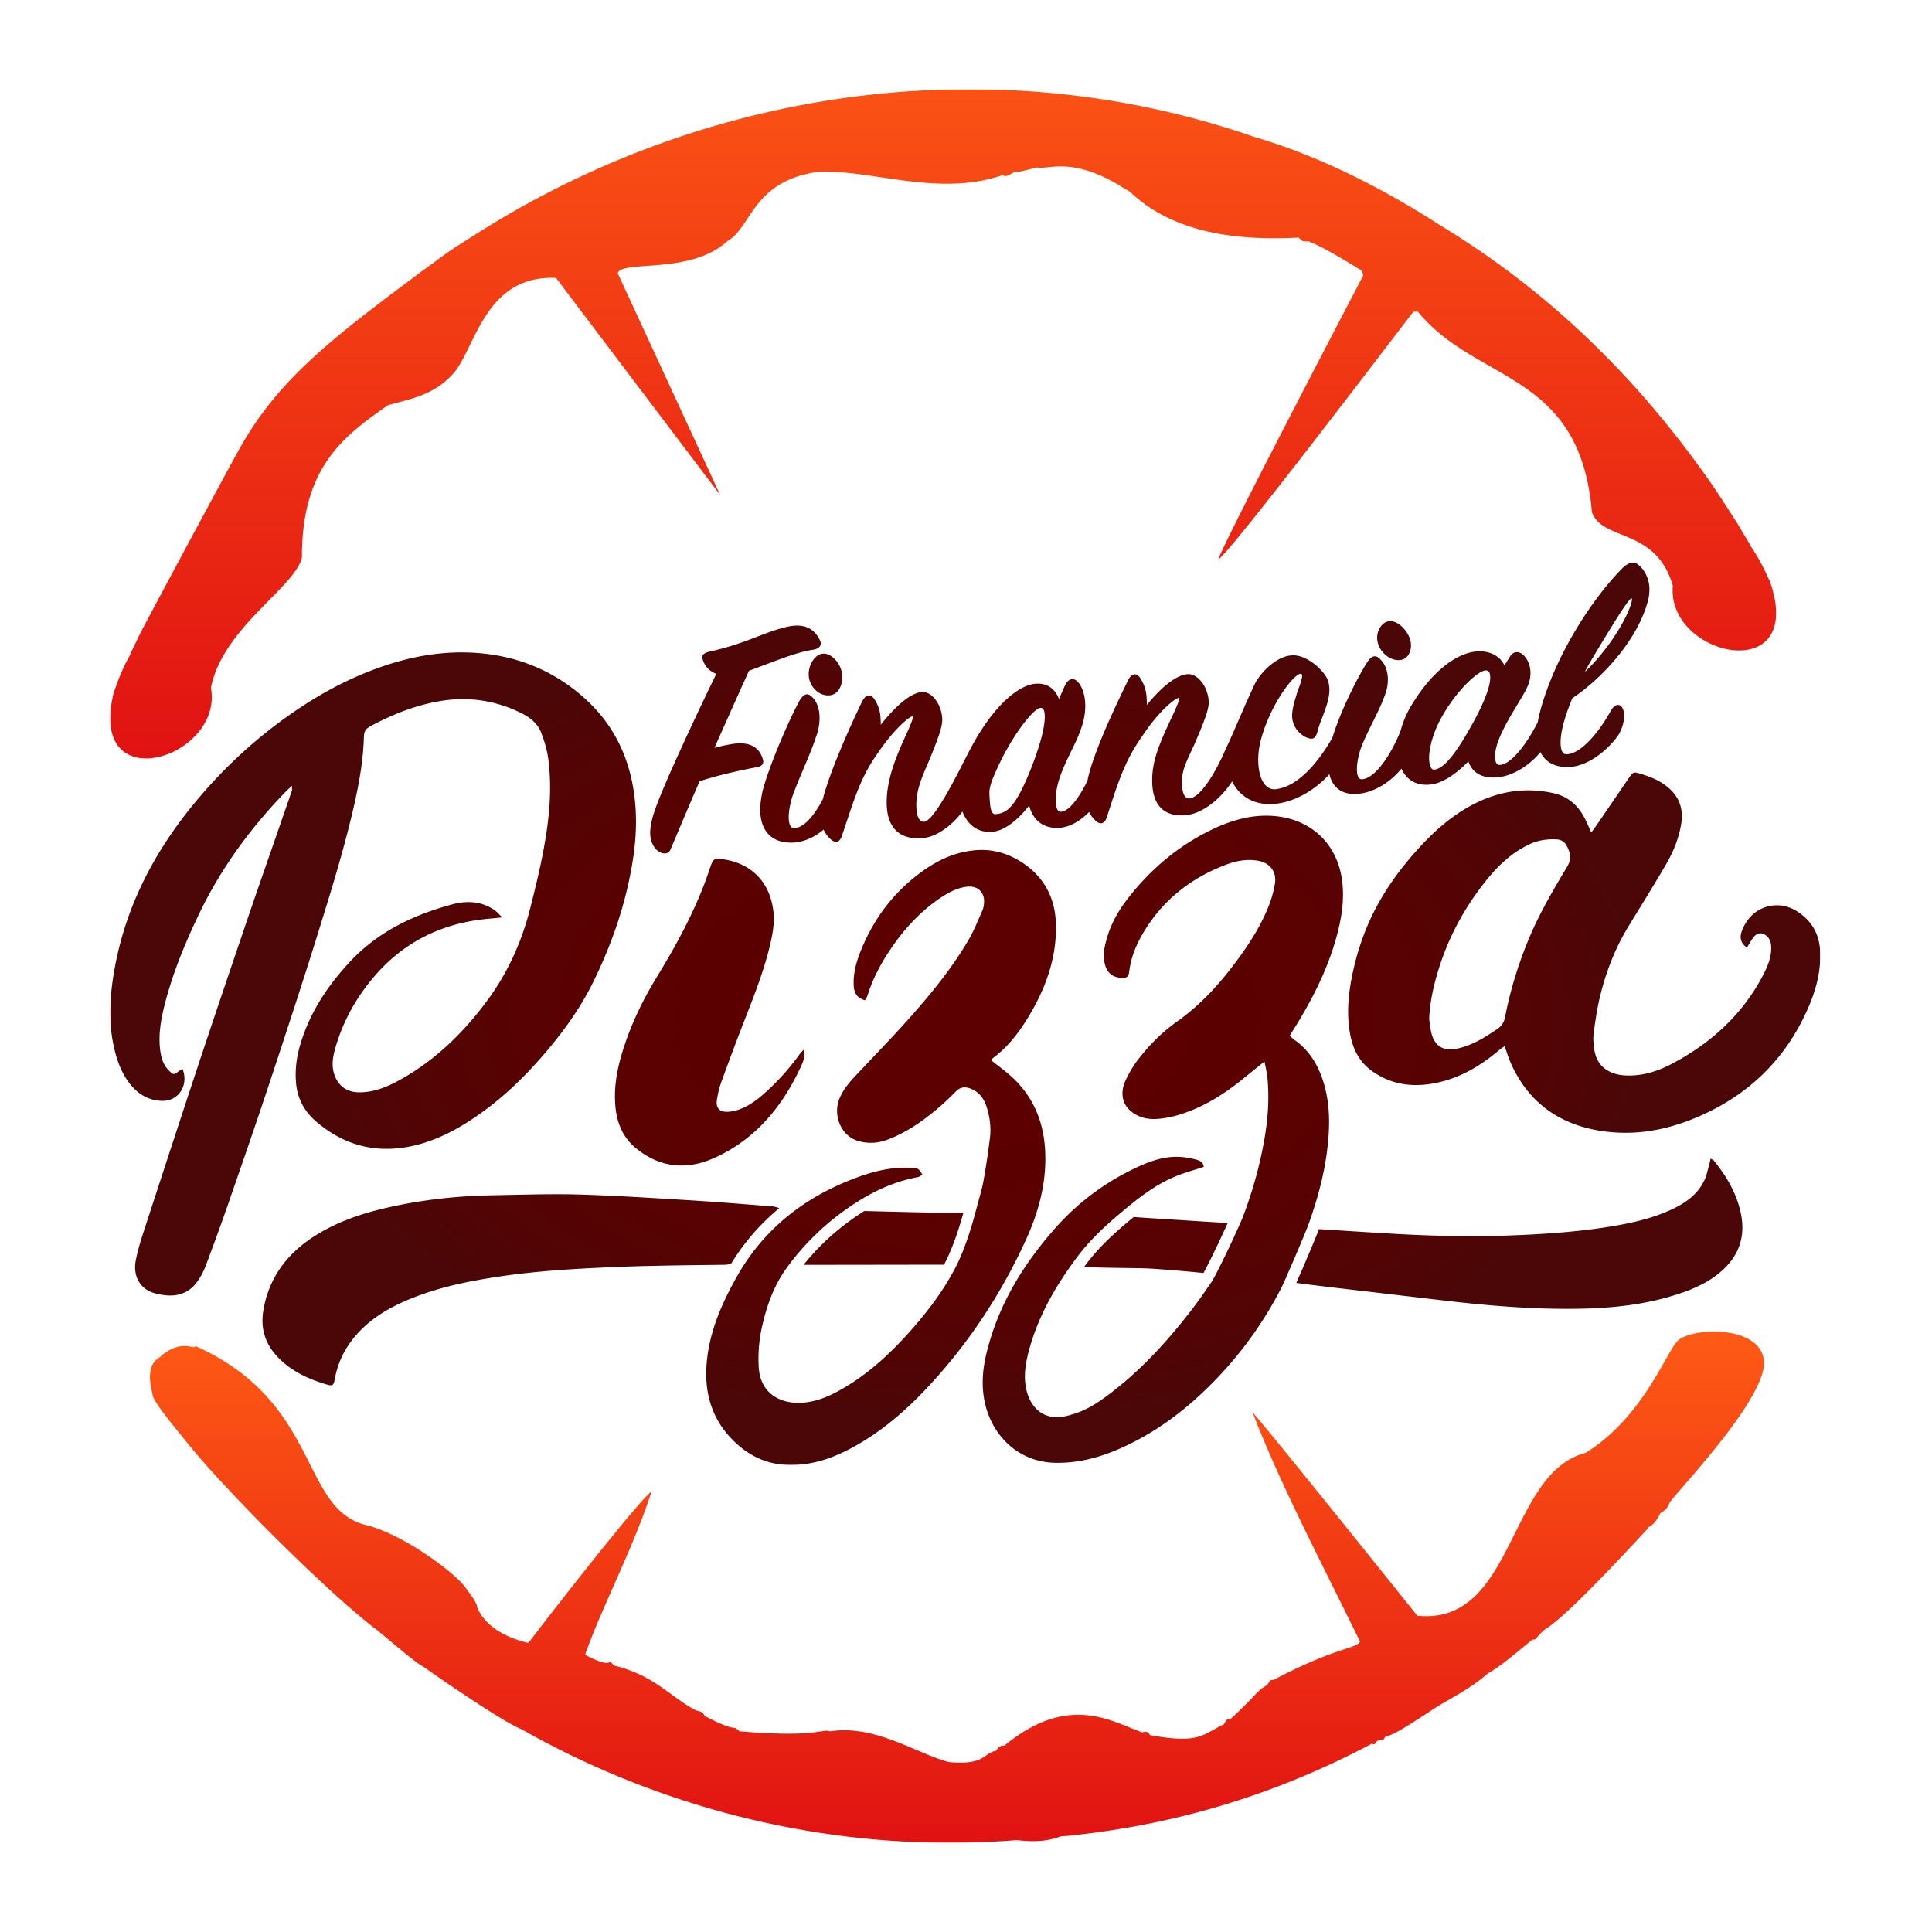 Financial Pizza The Advisors have taxes on their minds, specifically tax planning in retirement.